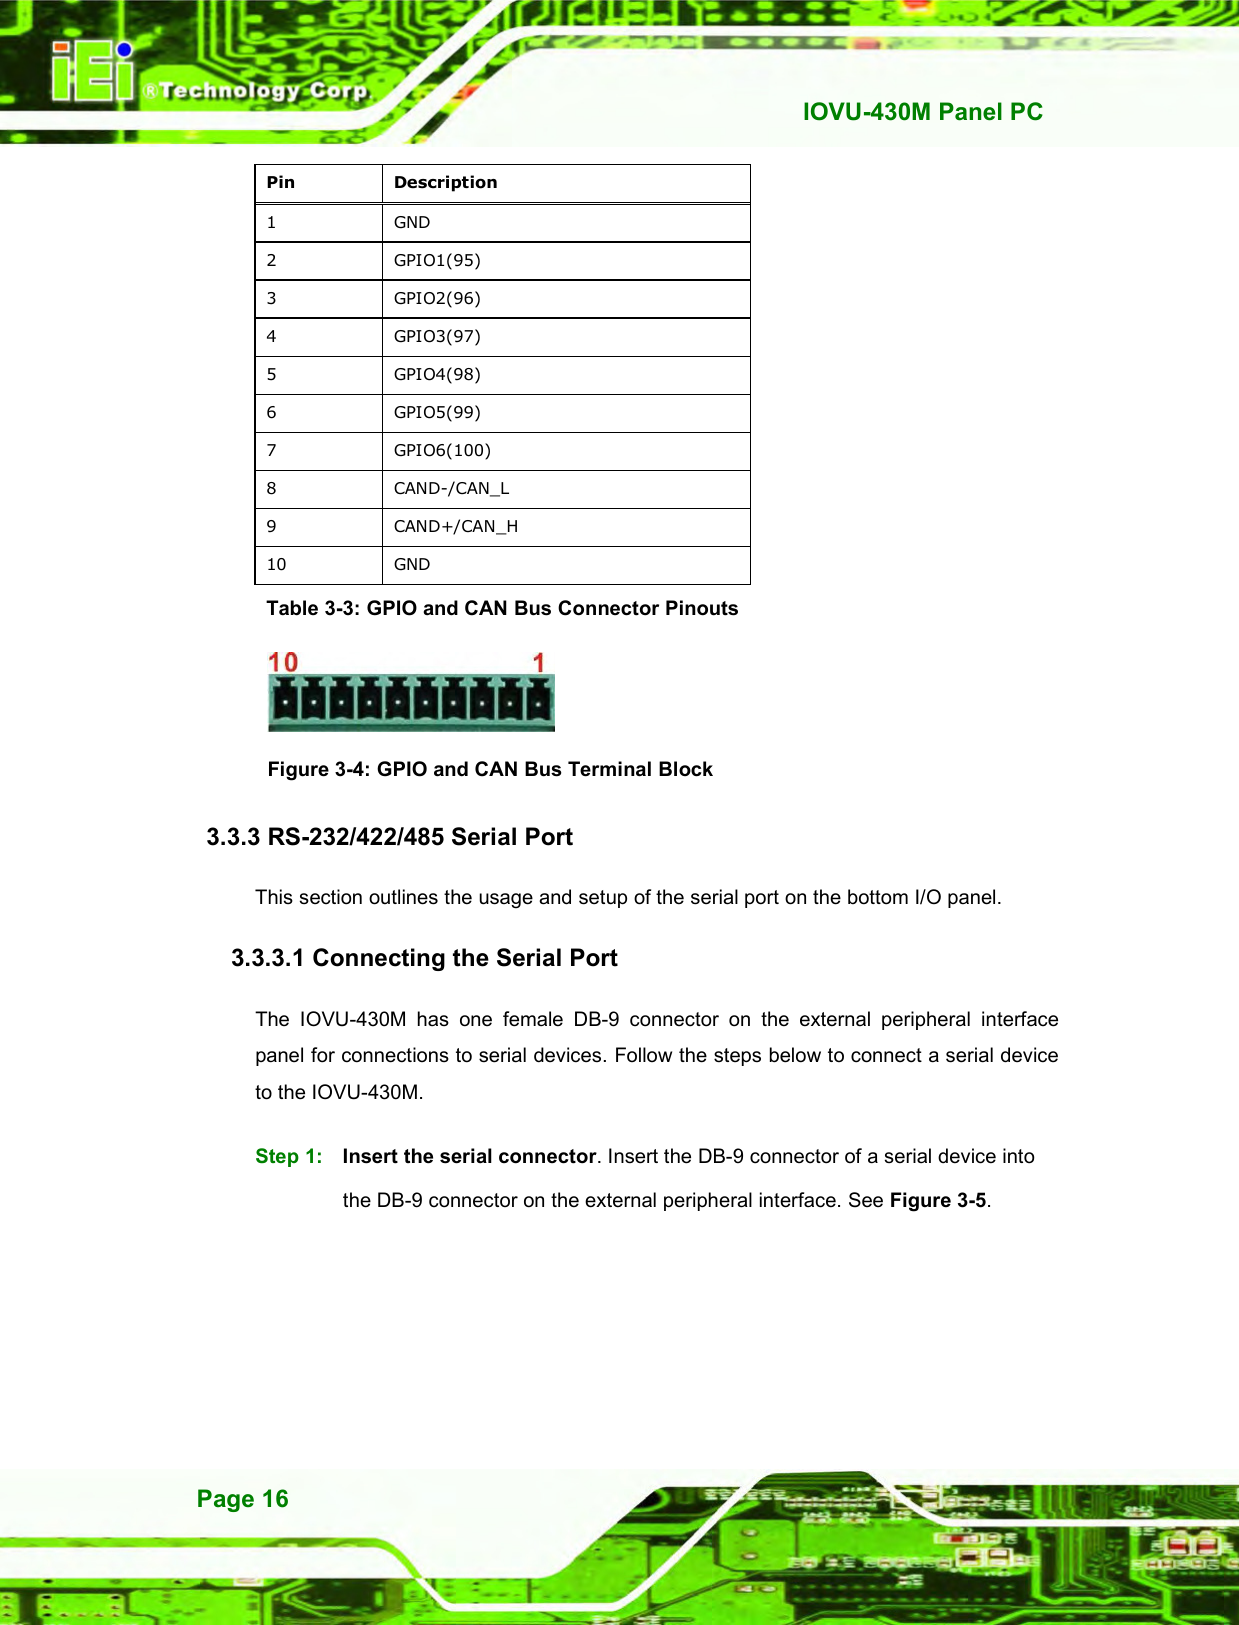   IOVU-430M Panel PC Page 16 Pin  Description 1  GND 2  GPIO1(95) 3  GPIO2(96) 4  GPIO3(97) 5  GPIO4(98) 6  GPIO5(99) 7  GPIO6(100) 8  CAND-/CAN_L 9  CAND+/CAN_H 10  GND Table 3-3: GPIO and CAN Bus Connector Pinouts   Figure 3-4: GPIO and CAN Bus Terminal Block 3.3.3 RS-232/422/485 Serial Port This section outlines the usage and setup of the serial port on the bottom I/O panel. 3.3.3.1 Connecting the Serial Port The  IOVU-430M  has  one  female  DB-9  connector  on  the  external  peripheral  interface panel for connections to serial devices. Follow the steps below to connect a serial device to the IOVU-430M. Step 1:  Insert the serial connector. Insert the DB-9 connector of a serial device into the DB-9 connector on the external peripheral interface. See Figure 3-5. 